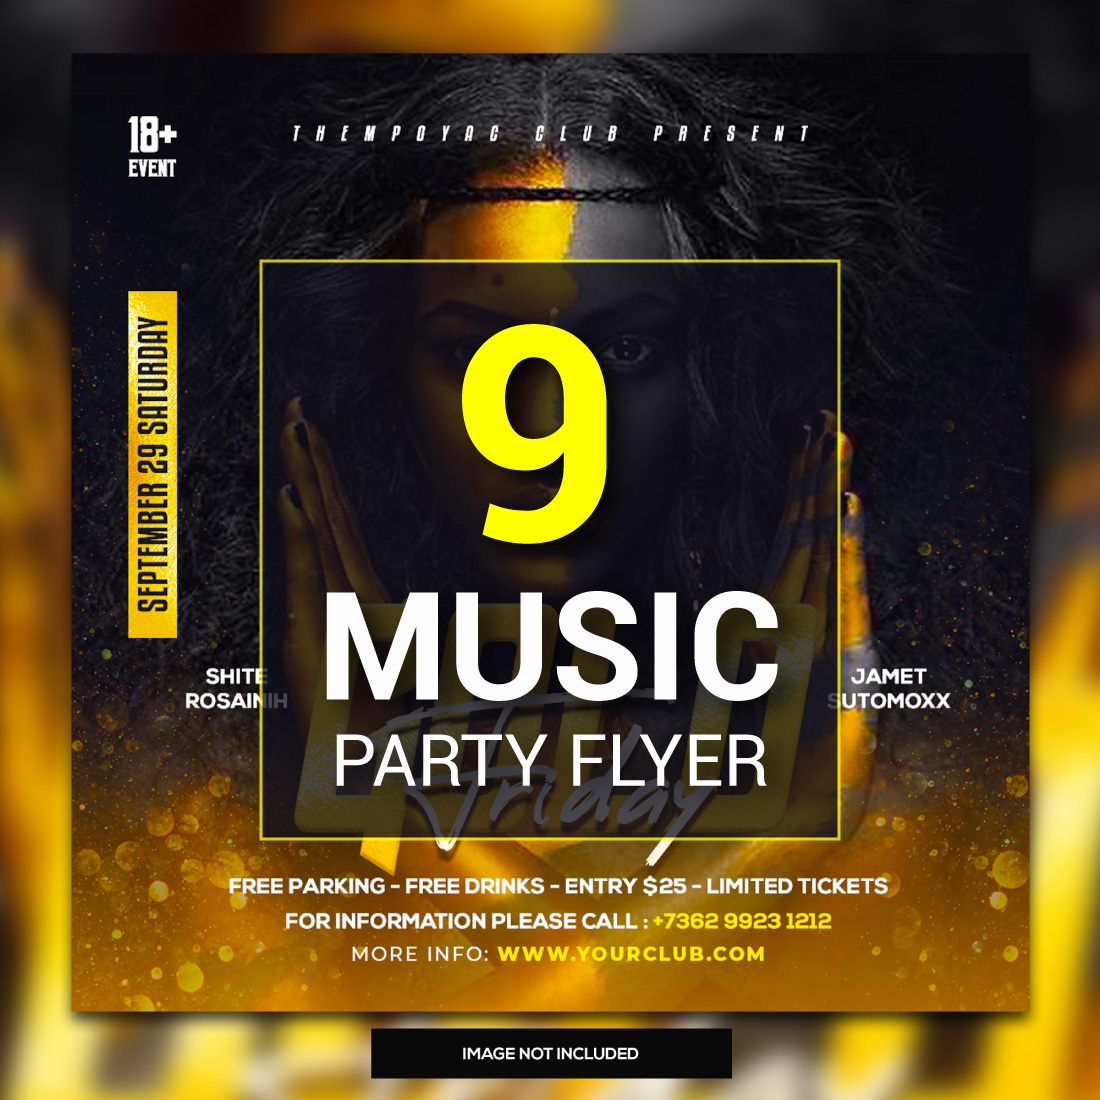 9 Music Party Flyer Template cover image.